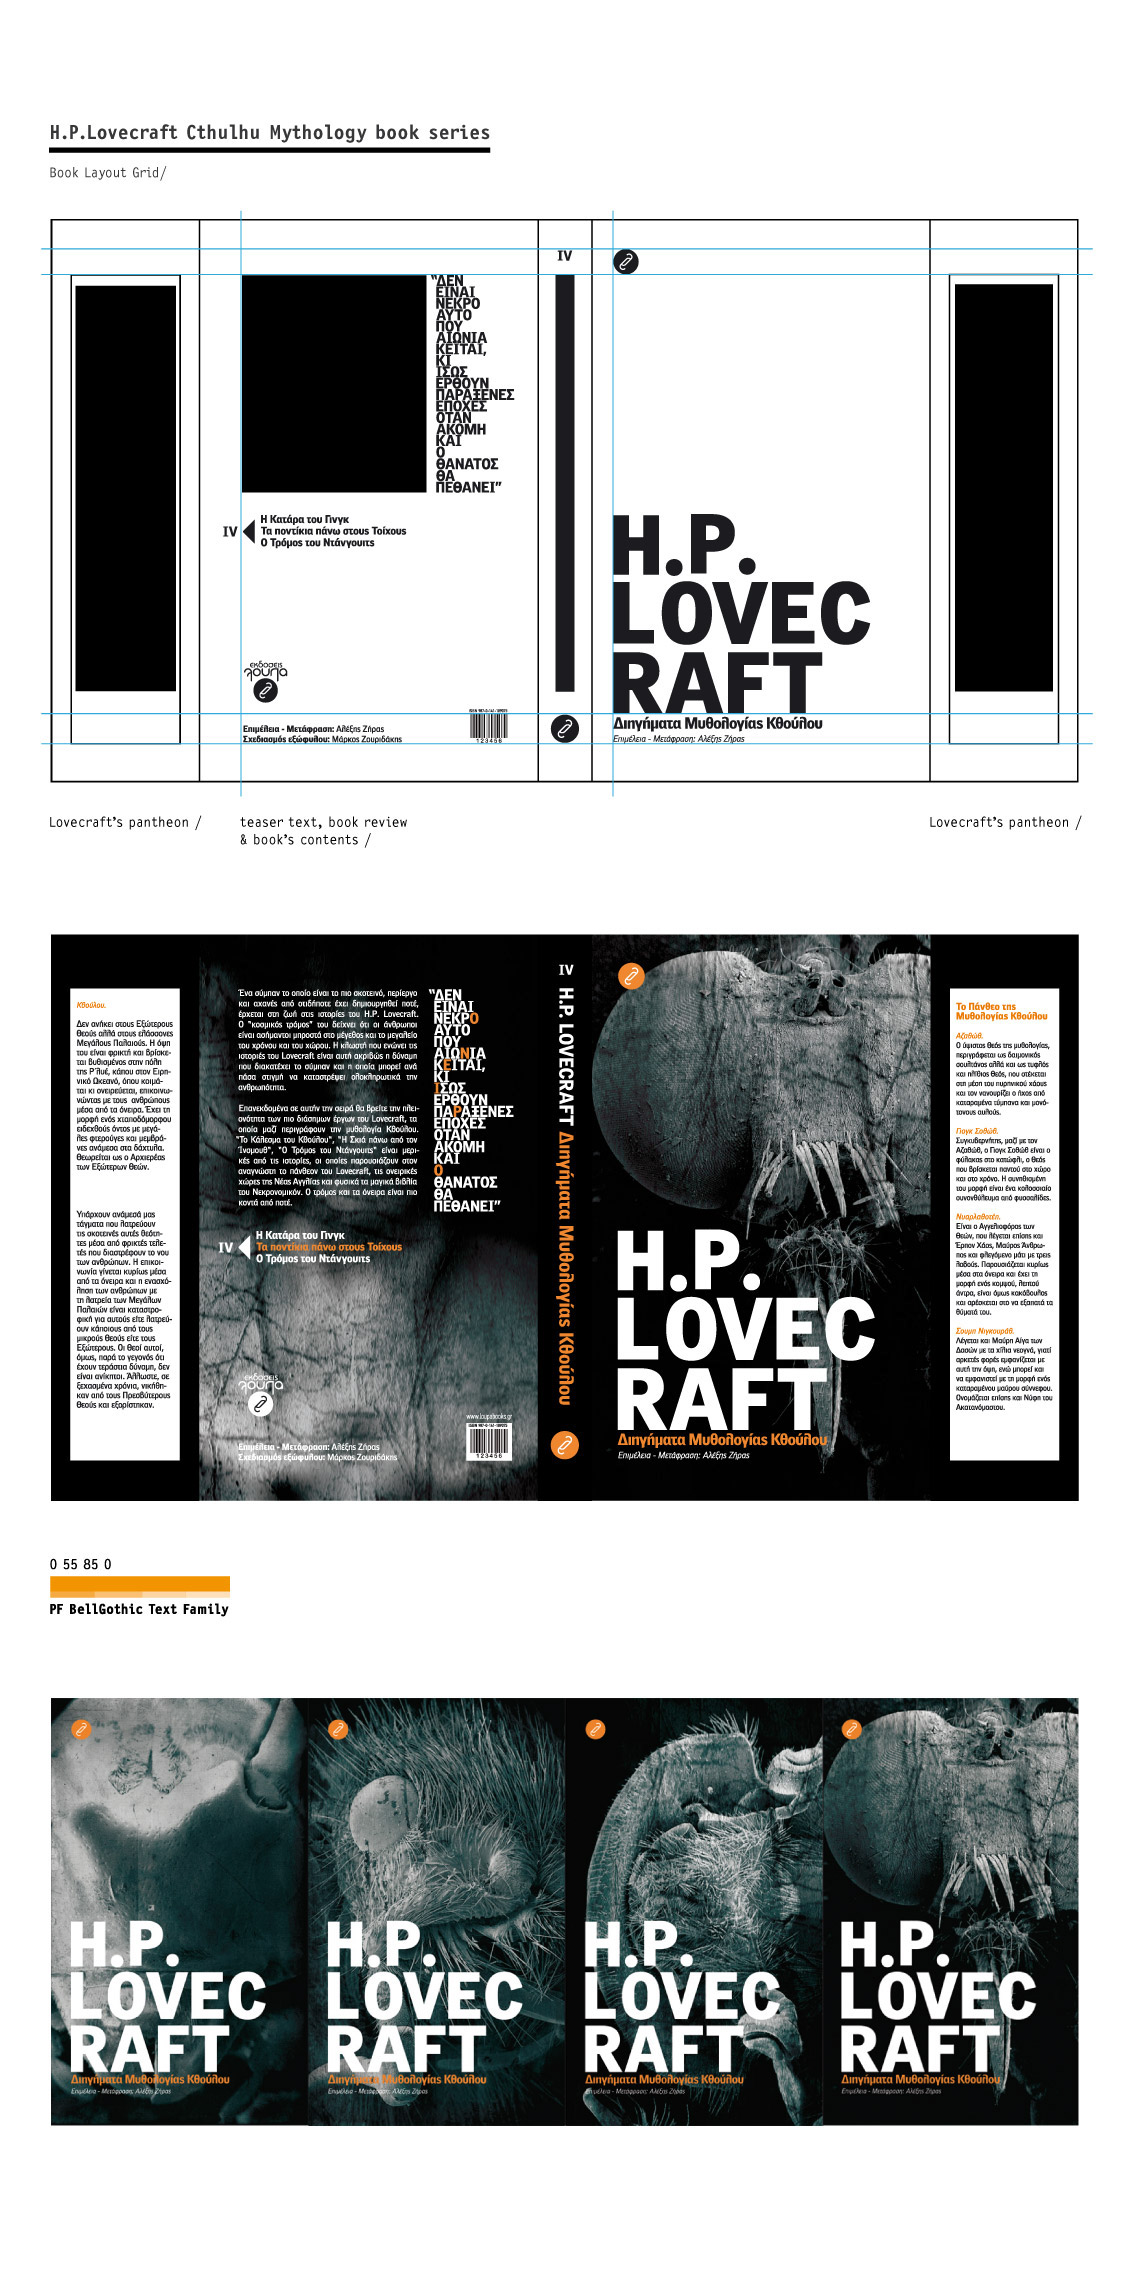 Edgar Allan Poe H.P. Lovecraft Book Layout Philip Dick Publishing Firm Loupa science fiction Book Series book cover classic literature fantasy horror Greek design BA project